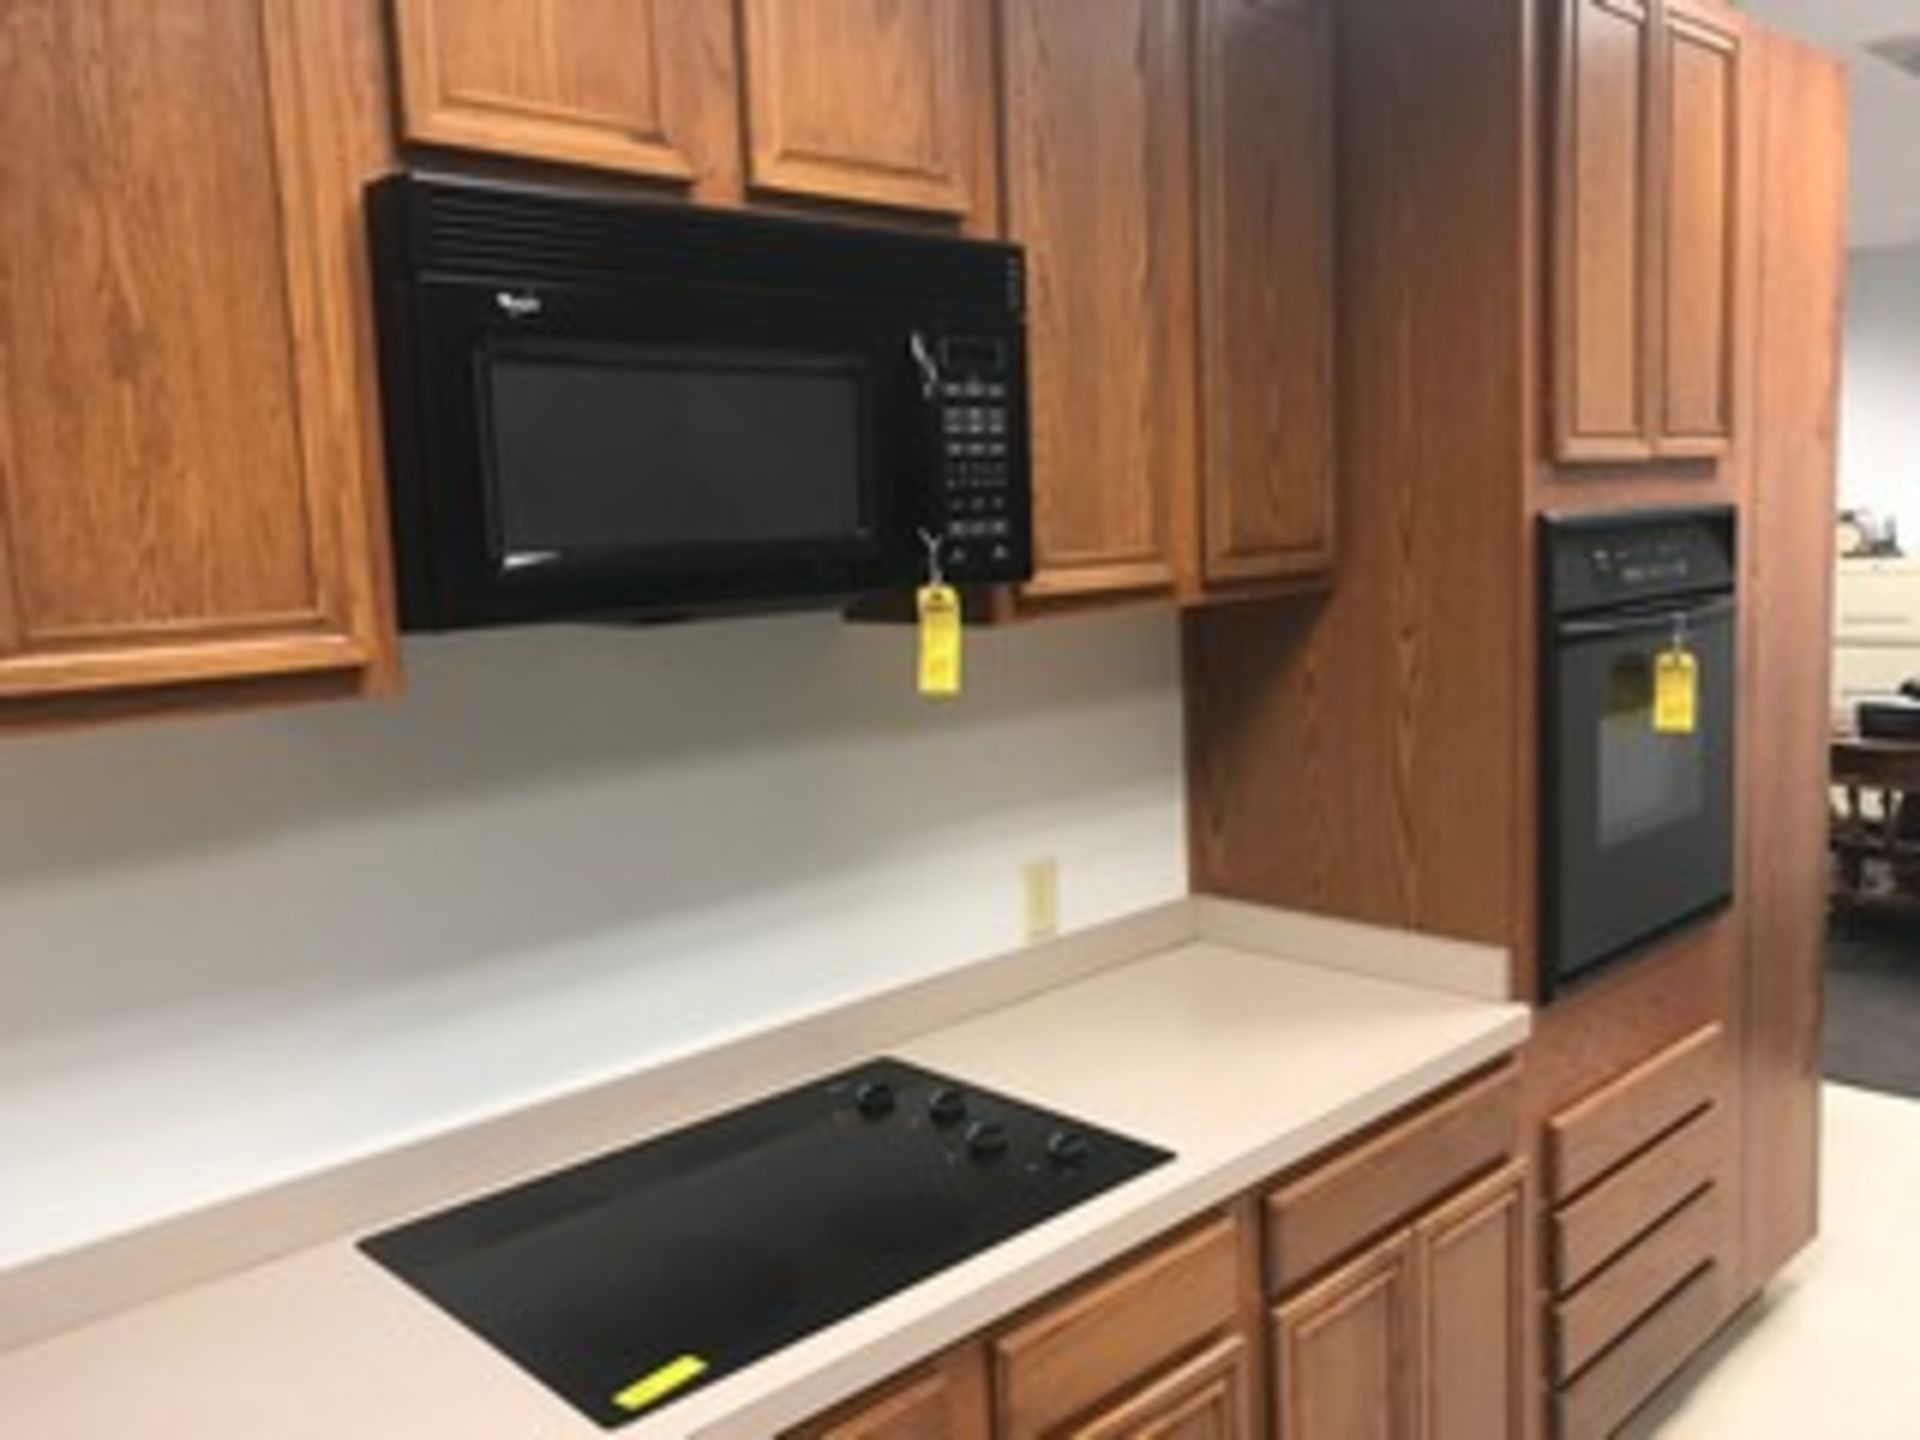 LOT WHIRLPOOL APPLIANCES - DROP IN RANGE / MICROWAVE / OVEN / DISHWASHER (LOCATED IN DALLAS, TX)